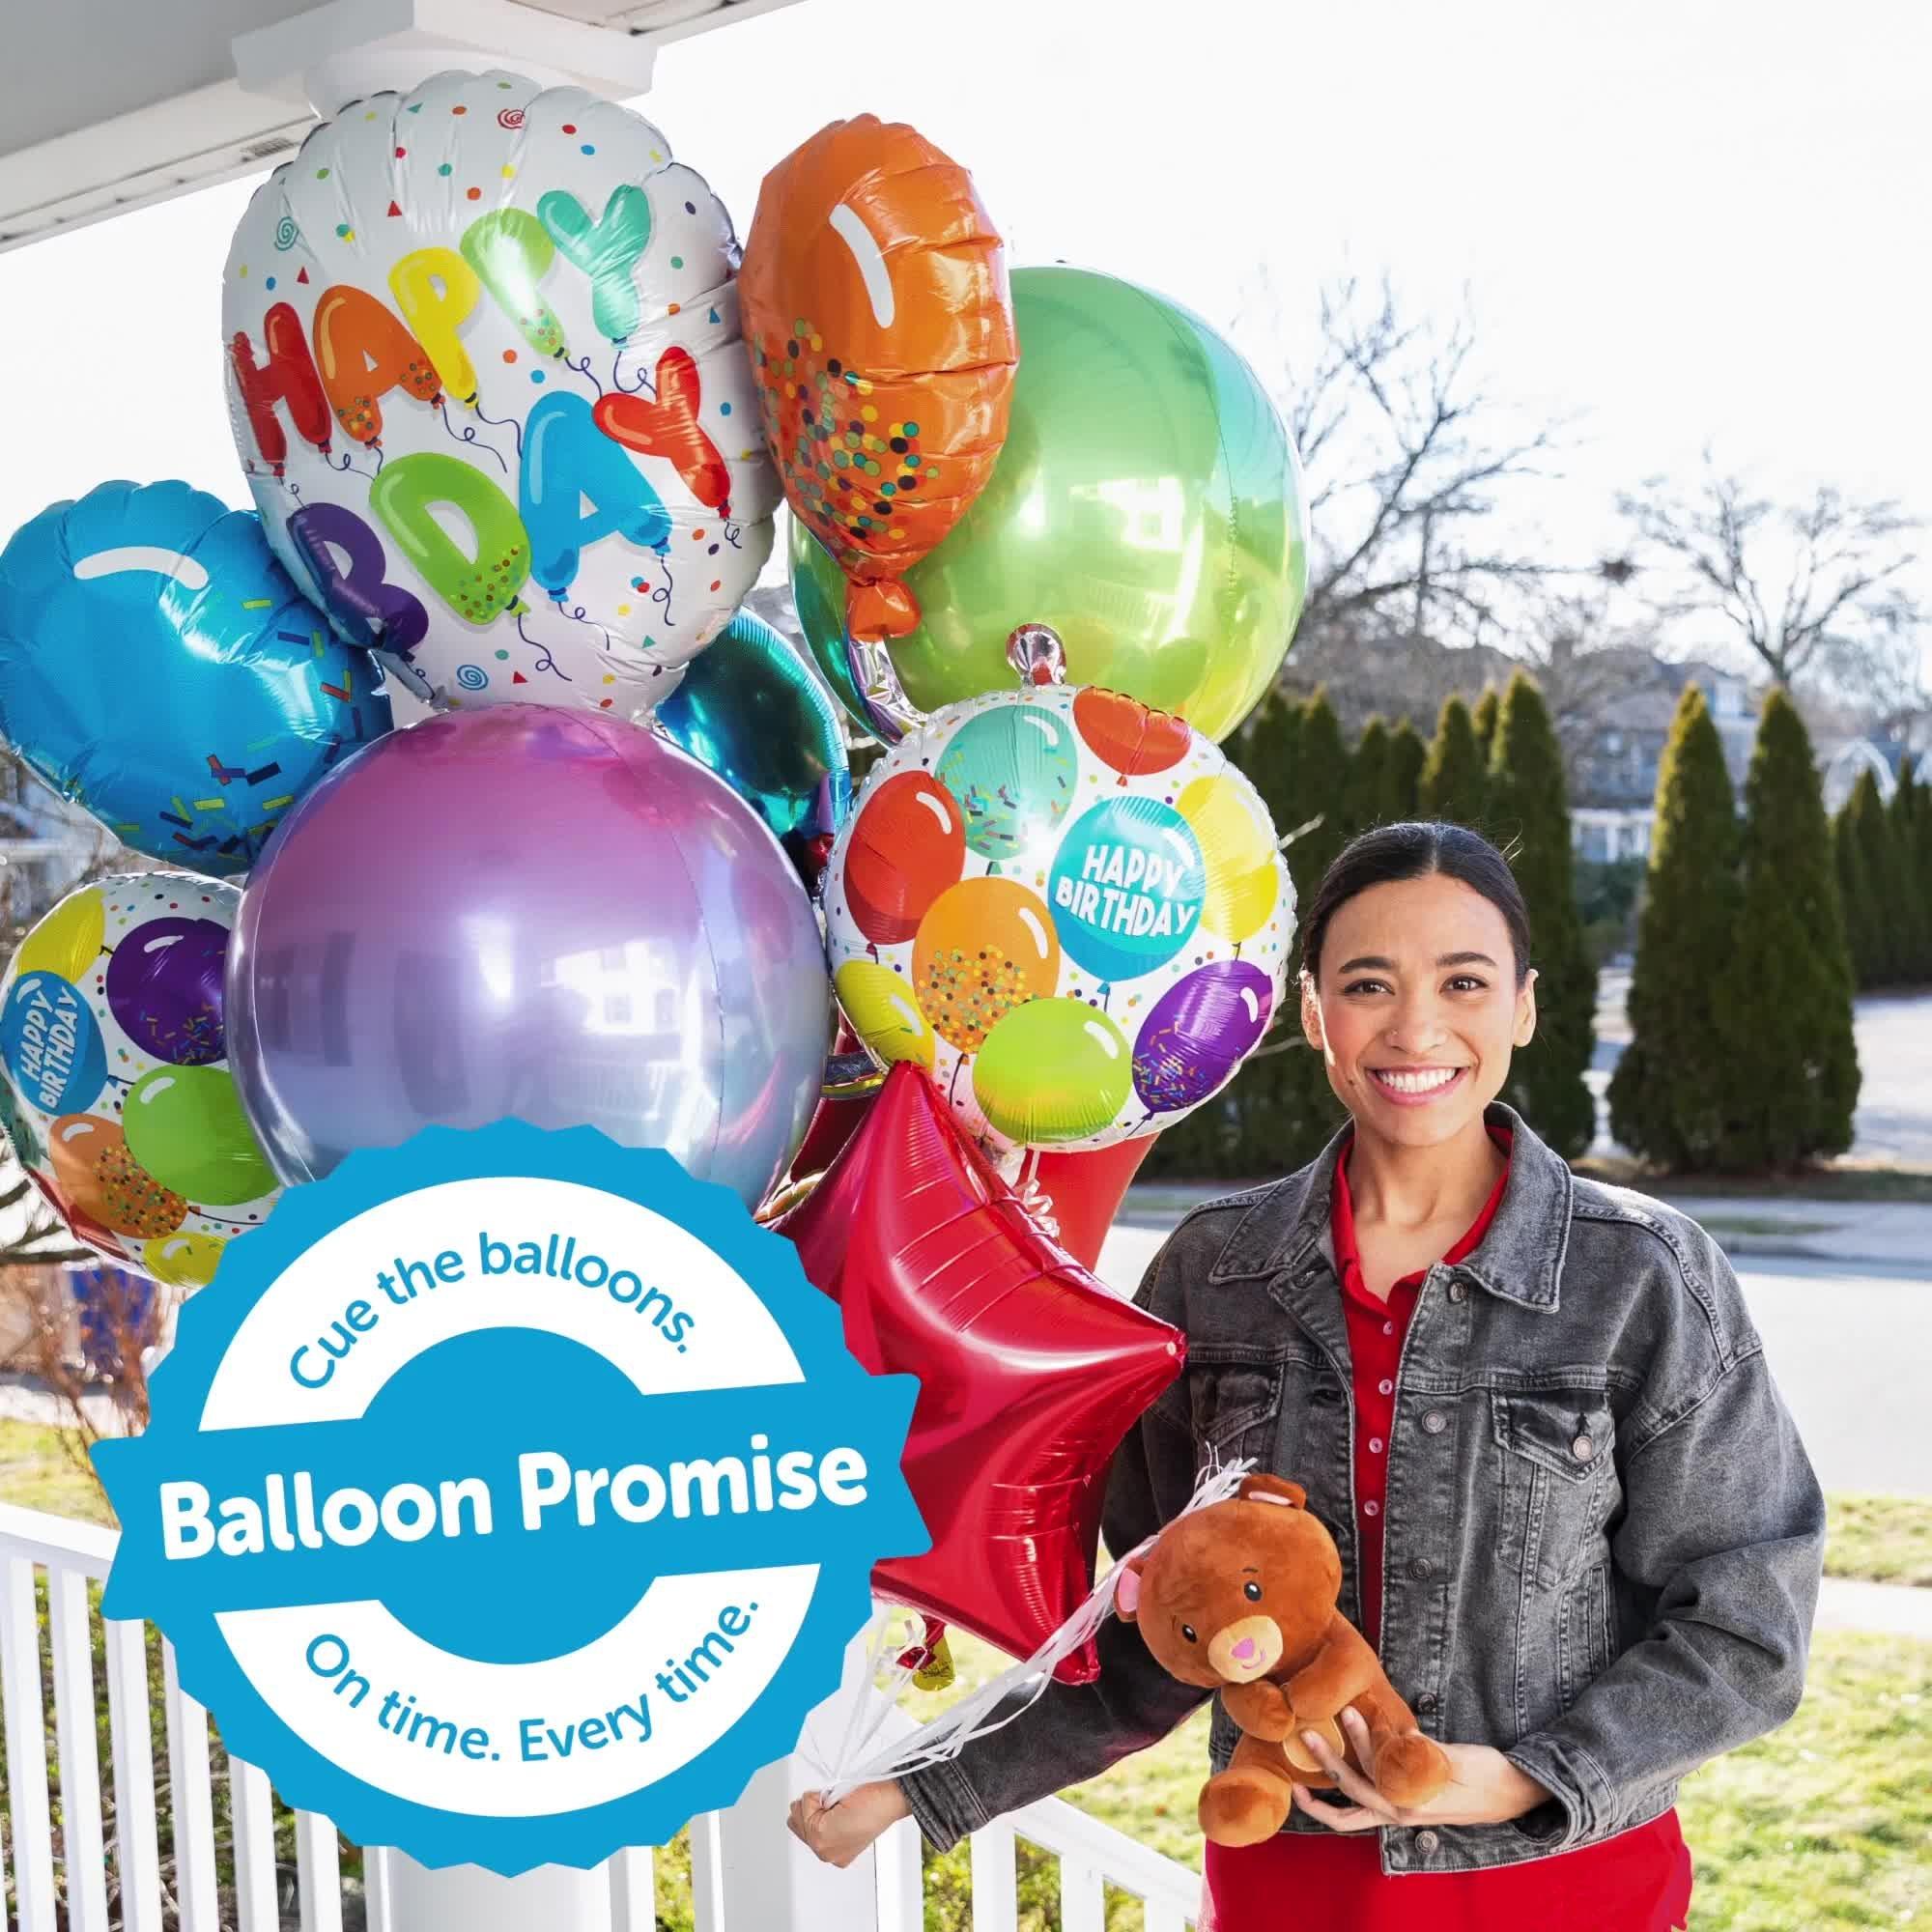 Premium Smiling Sun Welcome Back Foil Balloon Bouquet with Balloon Weight, 13pc